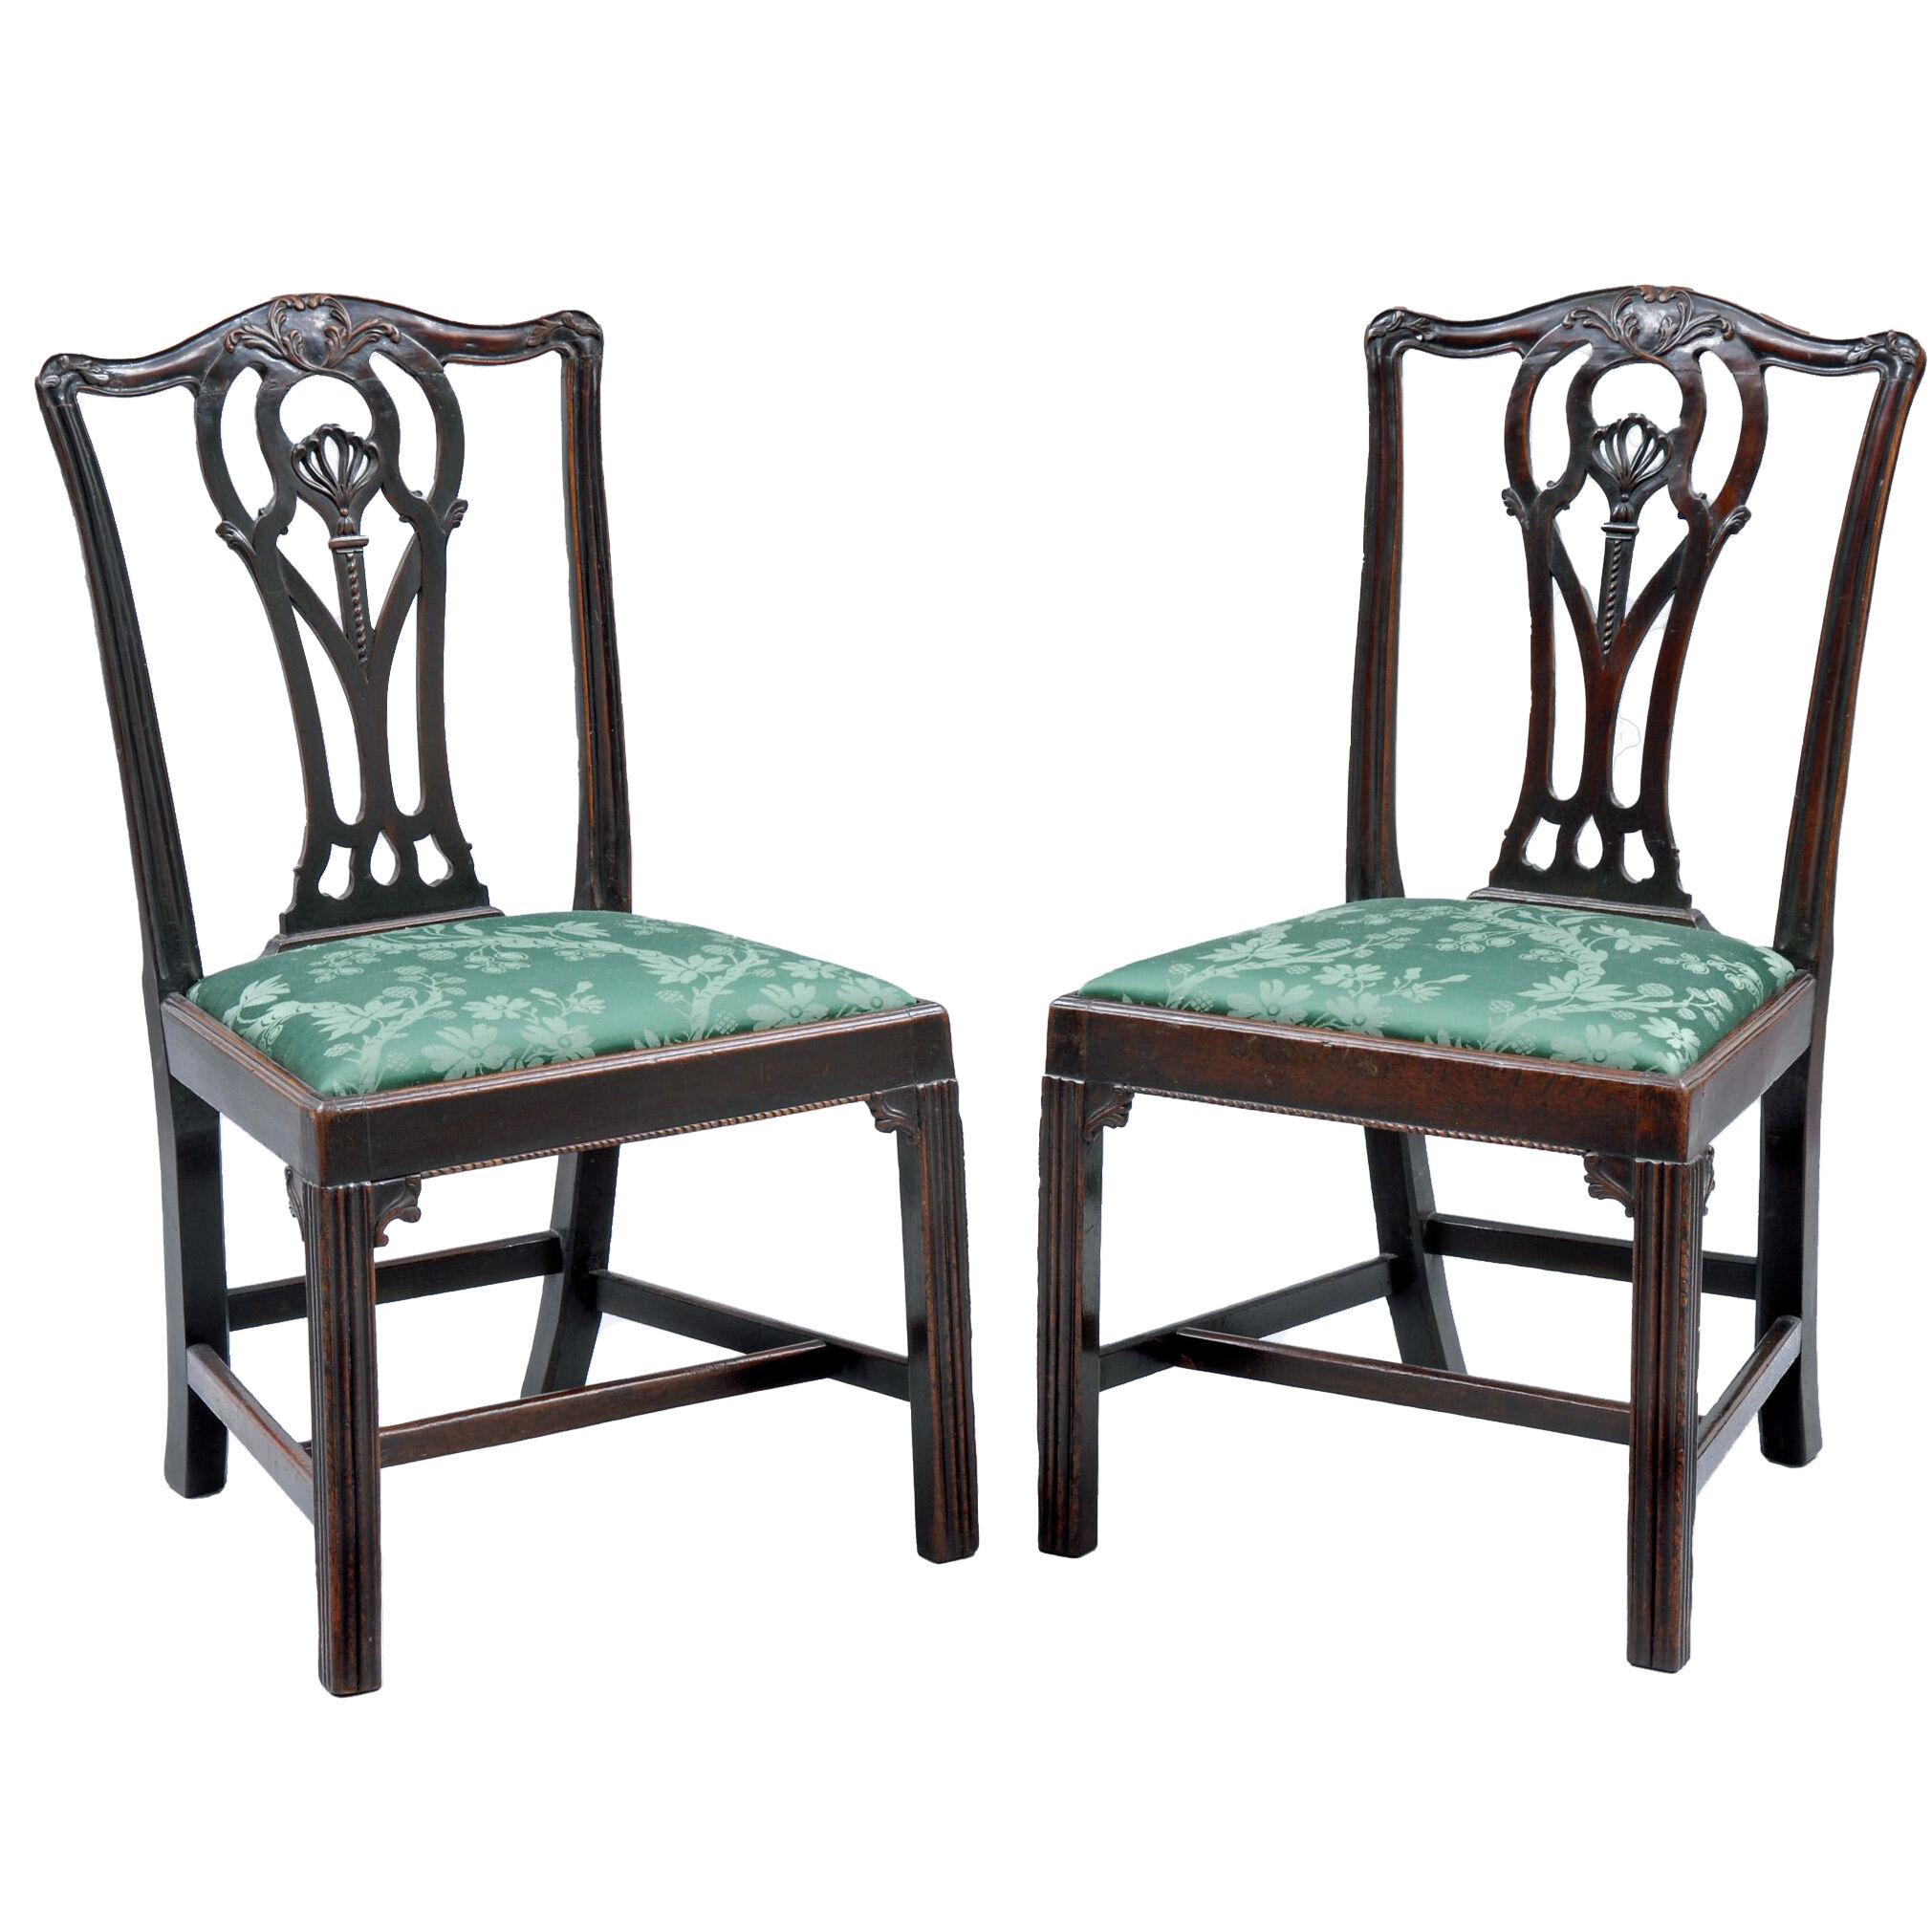 Pair of Period Chippendale Mahogany Side Chairs, 18th Century